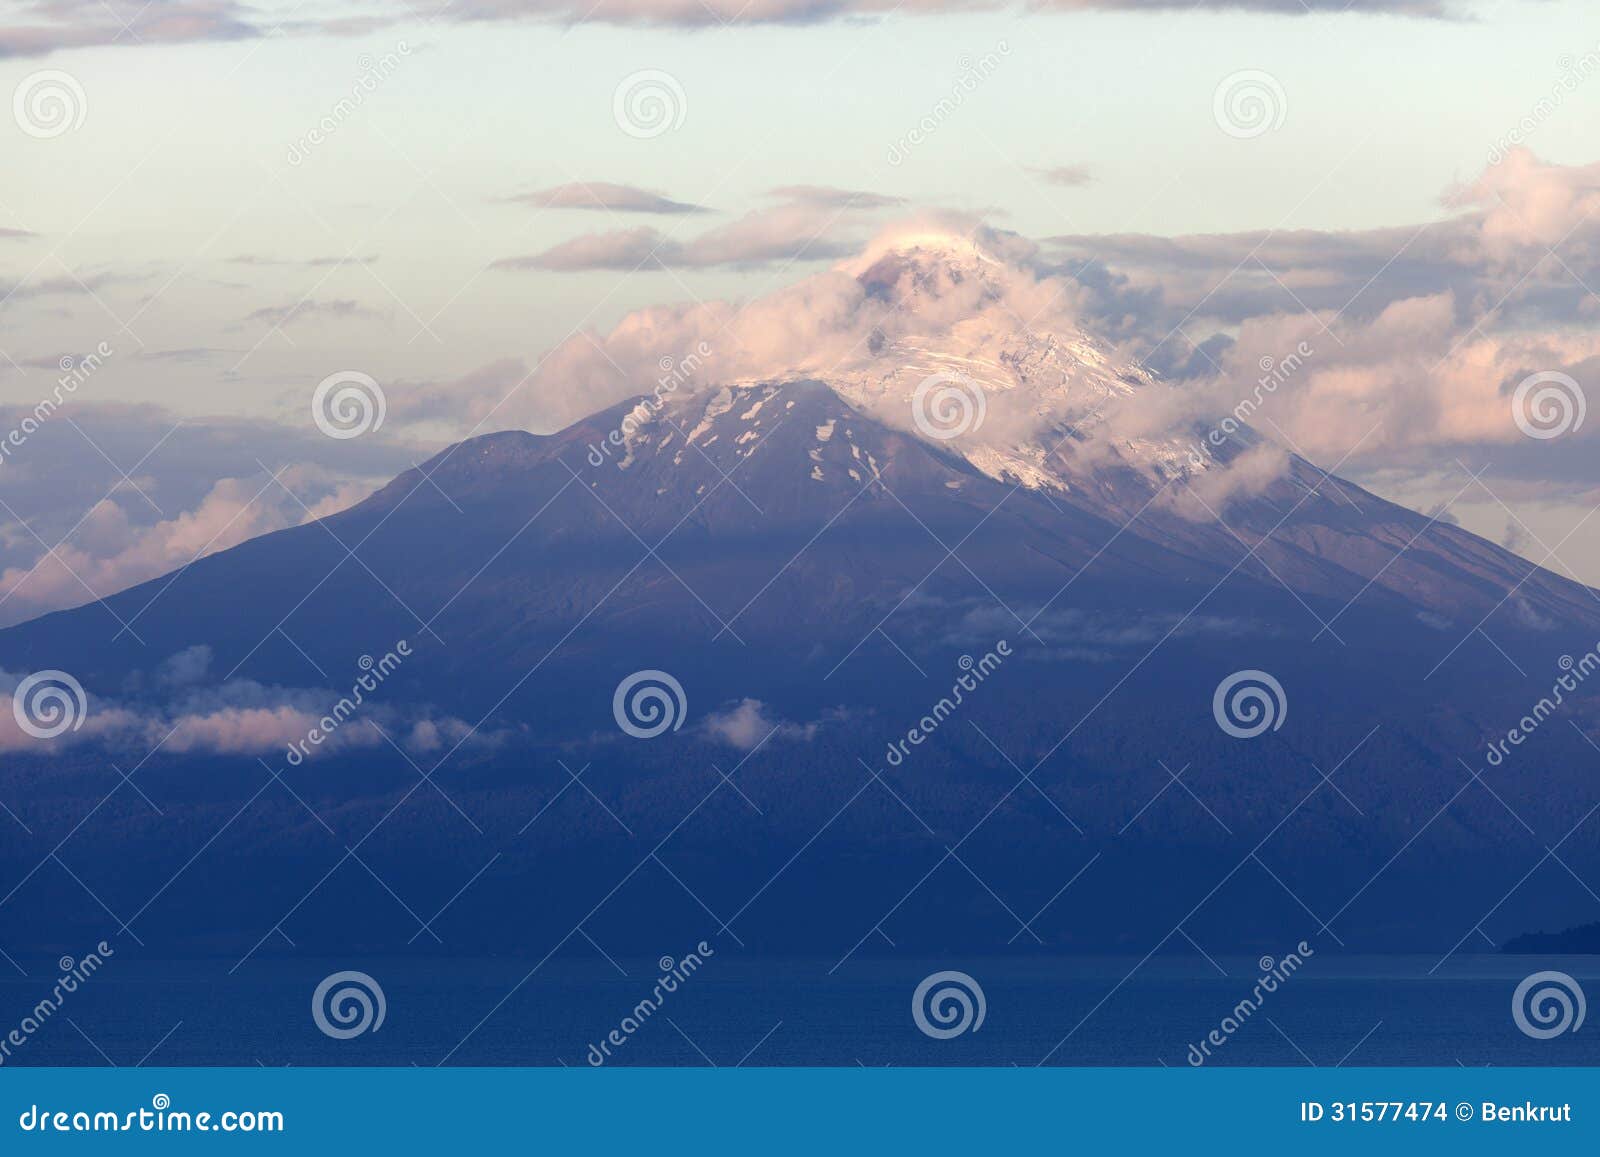 osorno volcano seen during the sunset from puerto varas